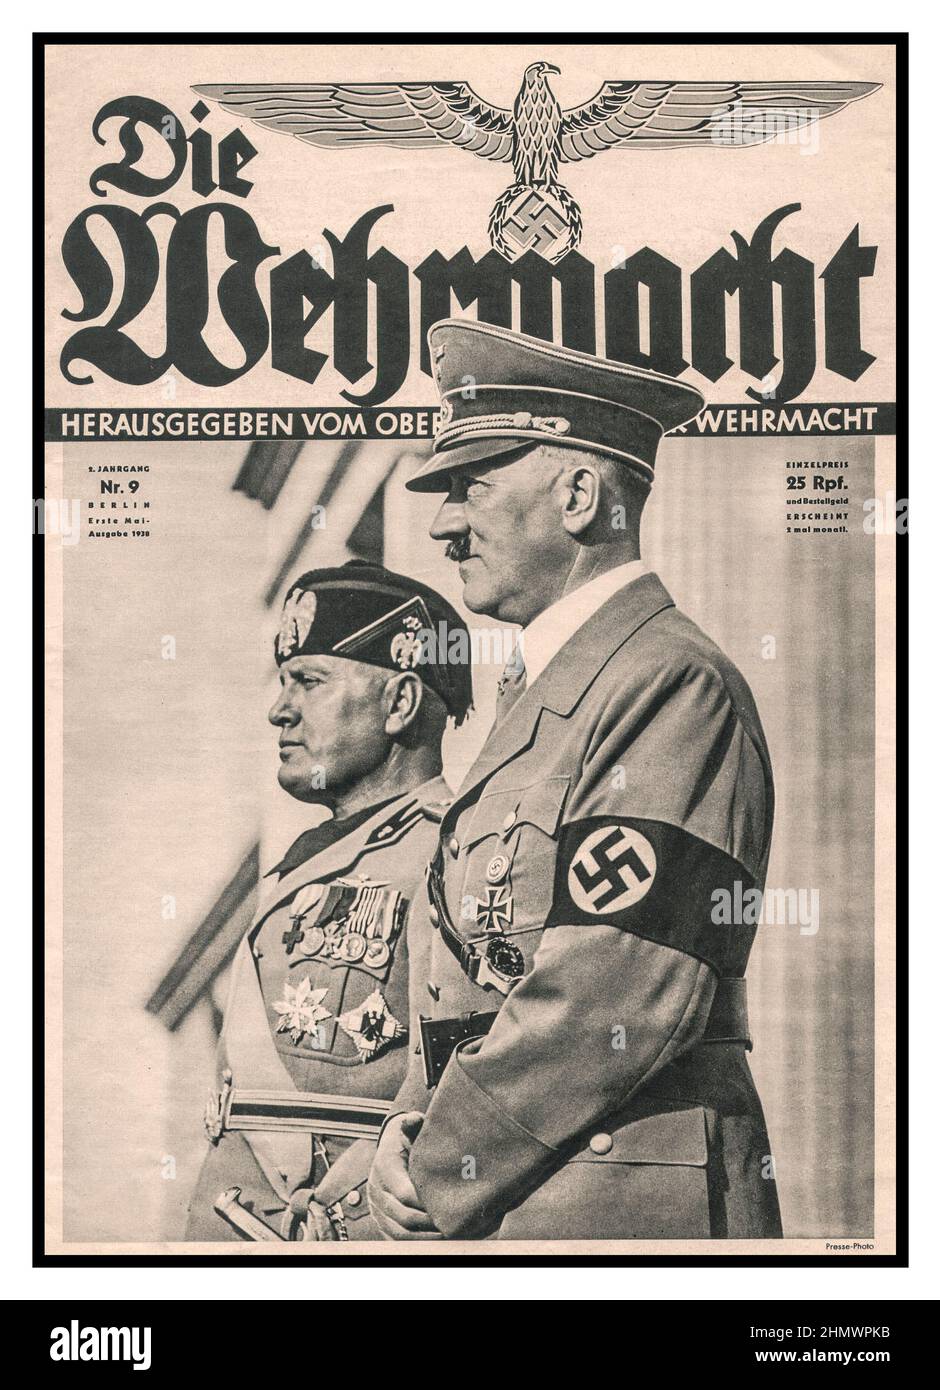 HITLER & MUSSOLINI Nazi Propaganda Magazine 'Die Wehrmacht' 1938 featuring Fuhrer Adolf Hitler  leader of Nazi Germany and Benito Mussolini leader of Facist Italy on the front cover, Stock Photo